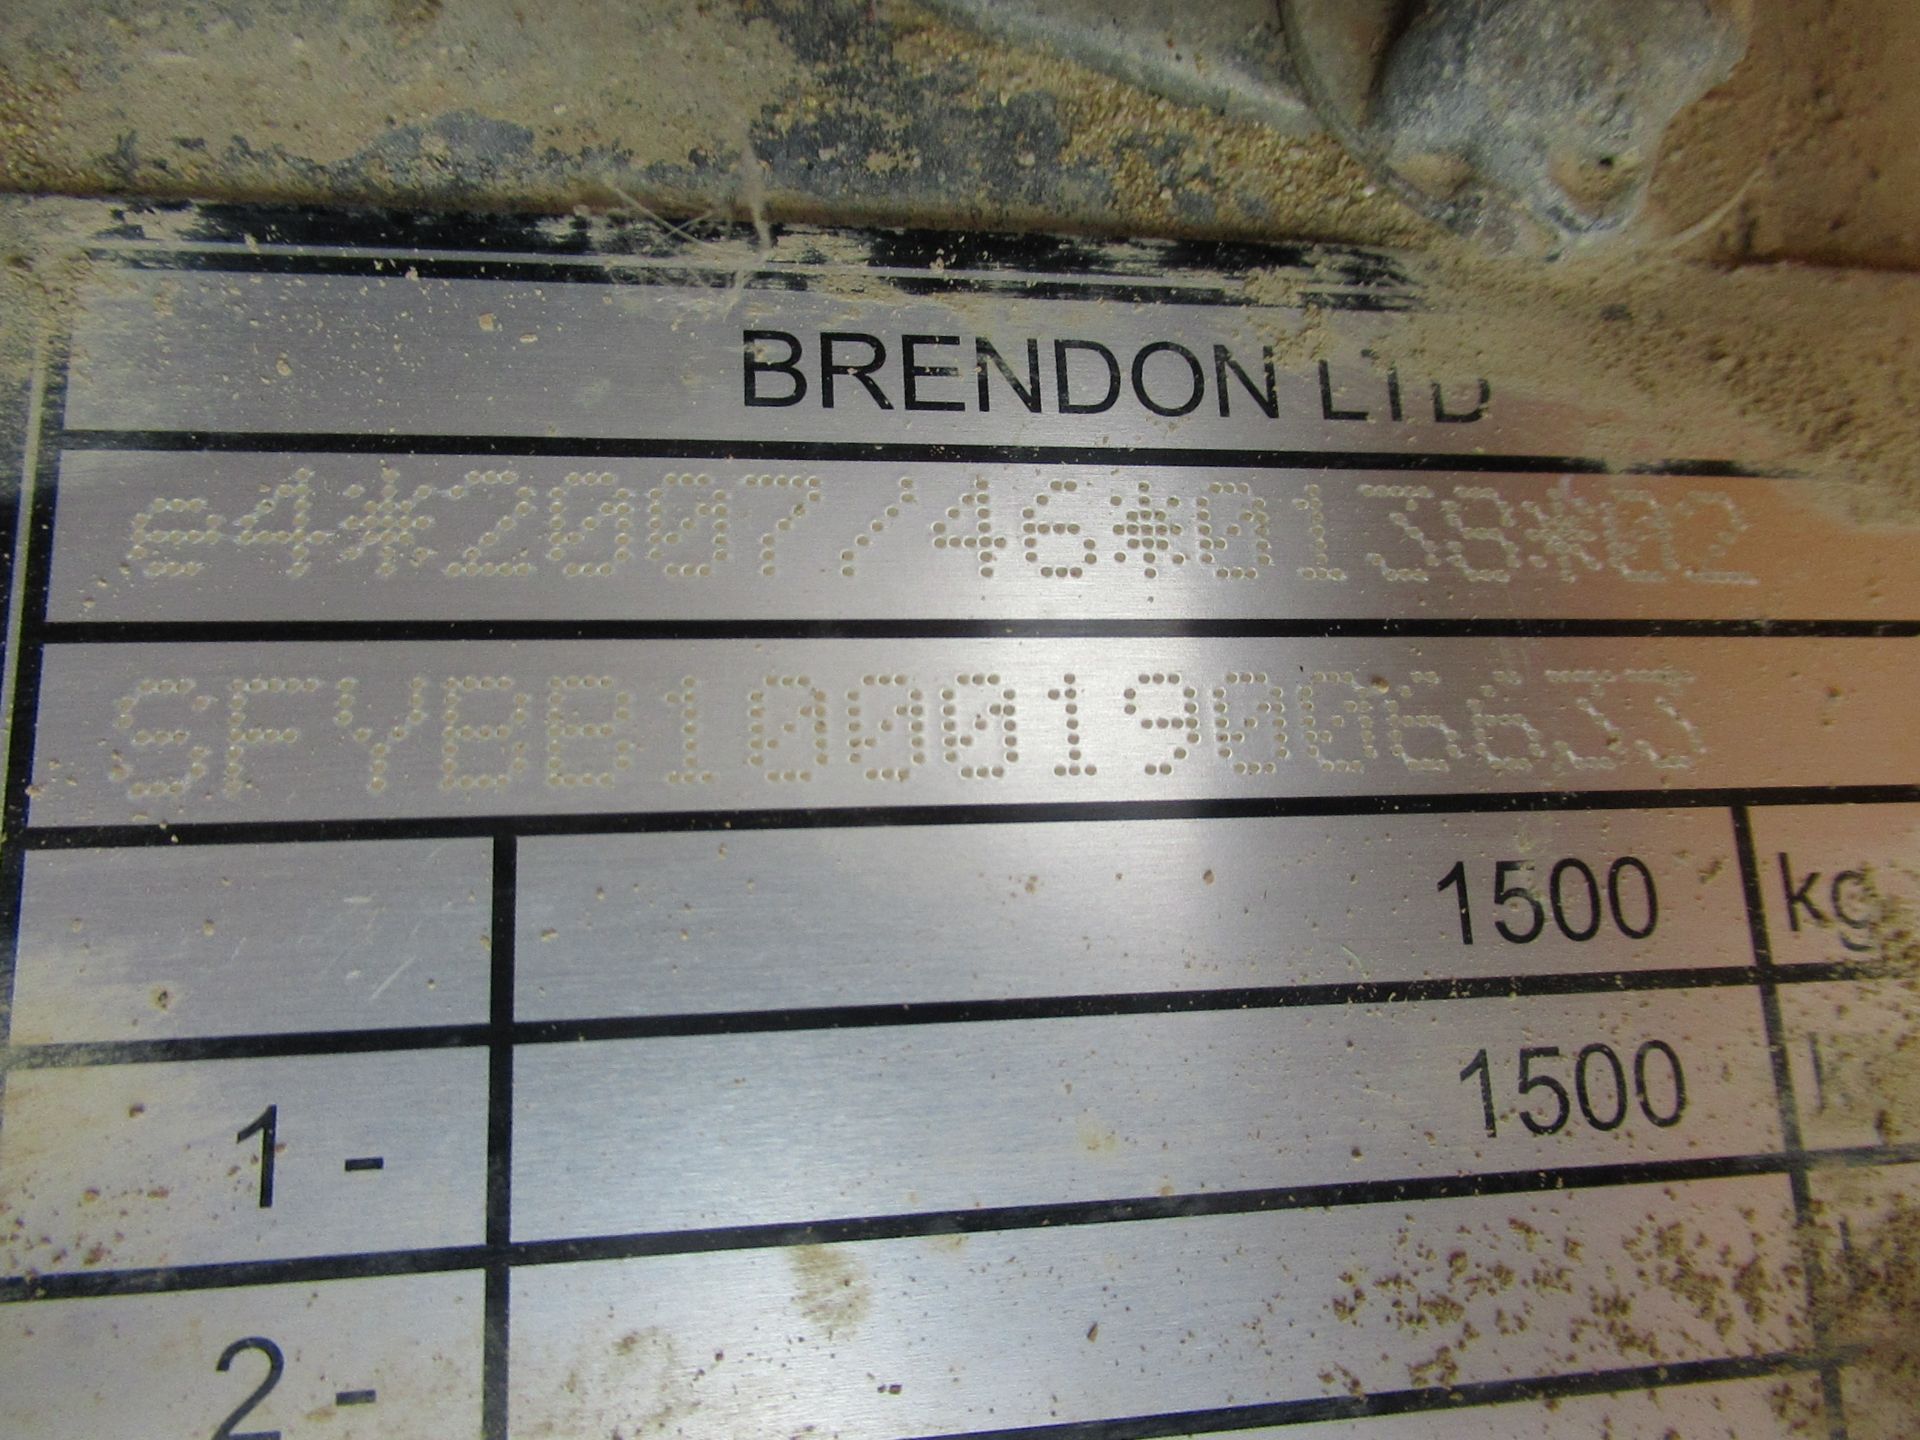 Brendon BB1000 towed diesel power washer/bowser - Image 4 of 5